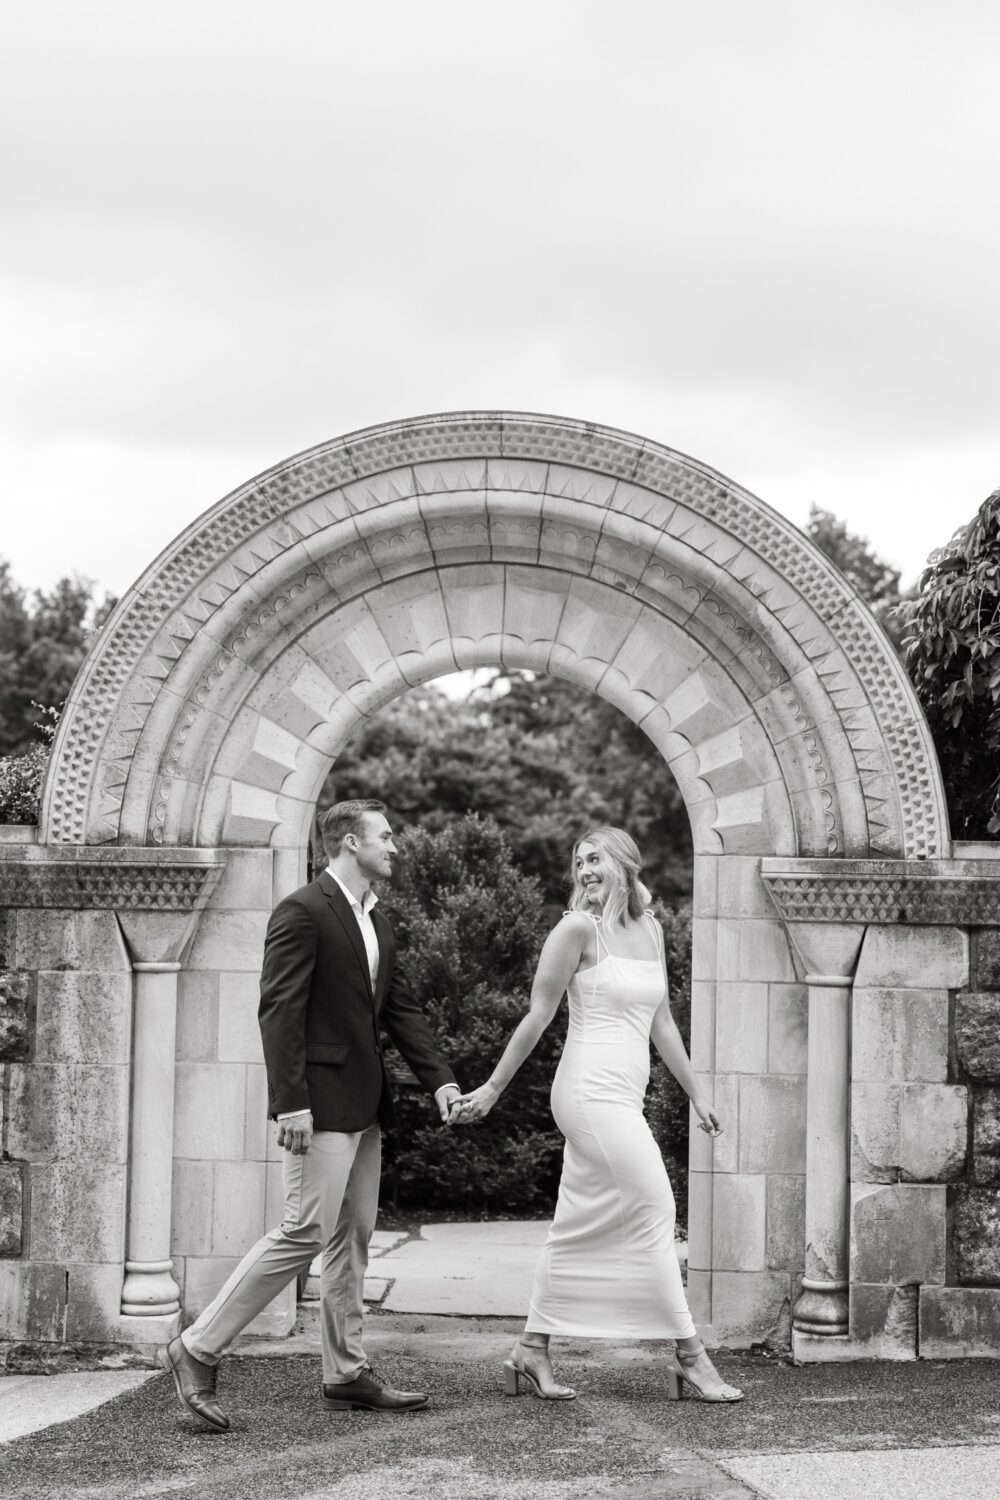 national cathedral engagement session bride leading groom by hand black and white picture